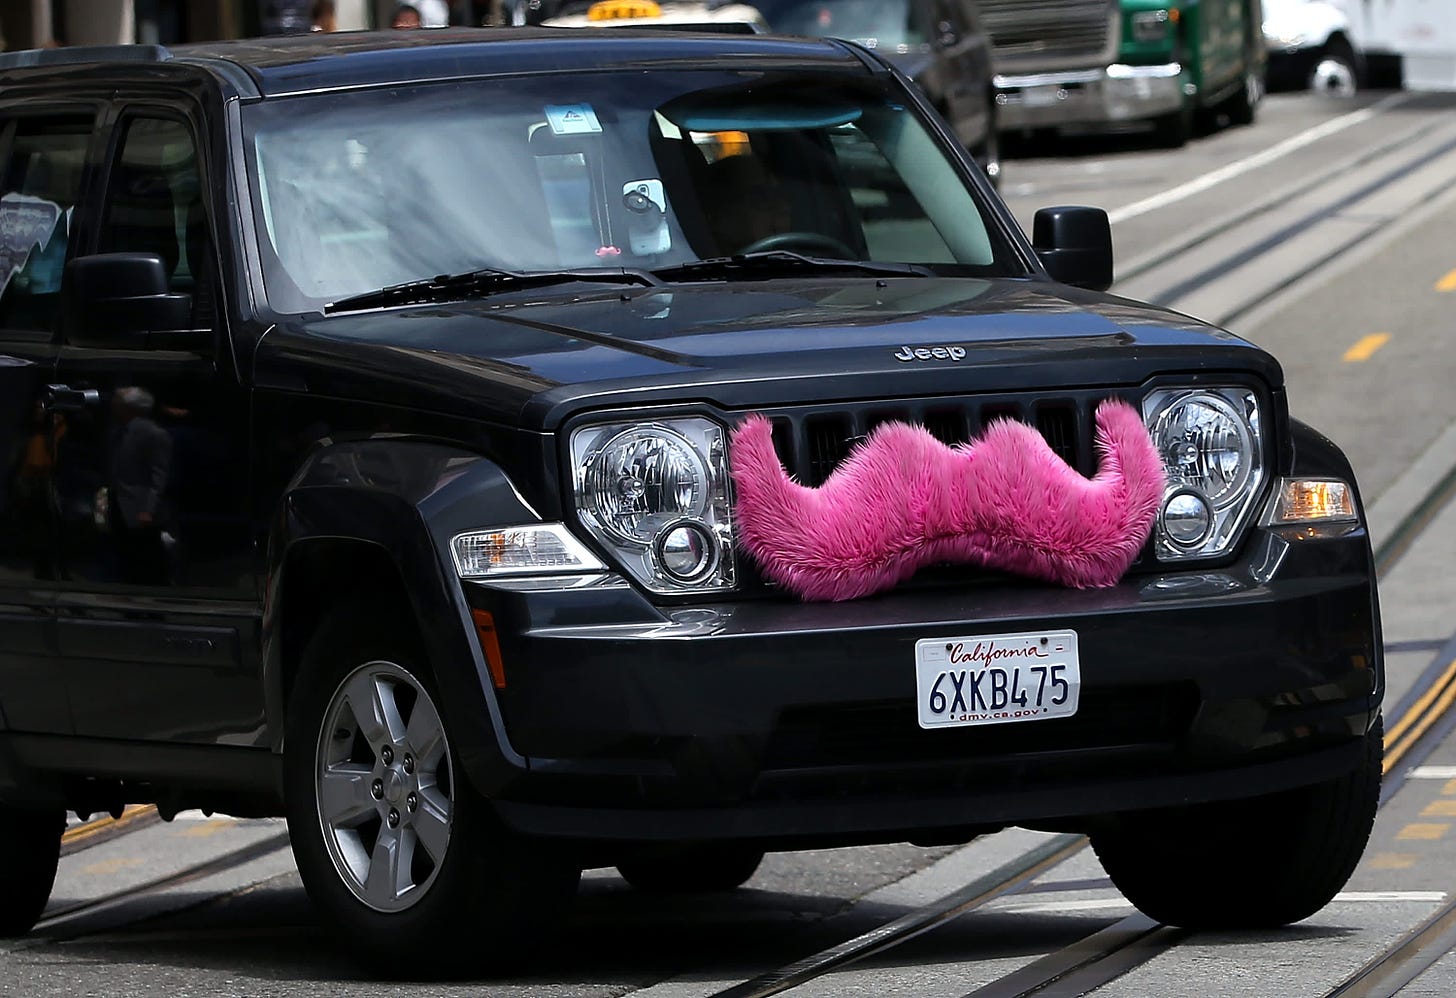 Lyft drops its quirky traits to compete with Uber